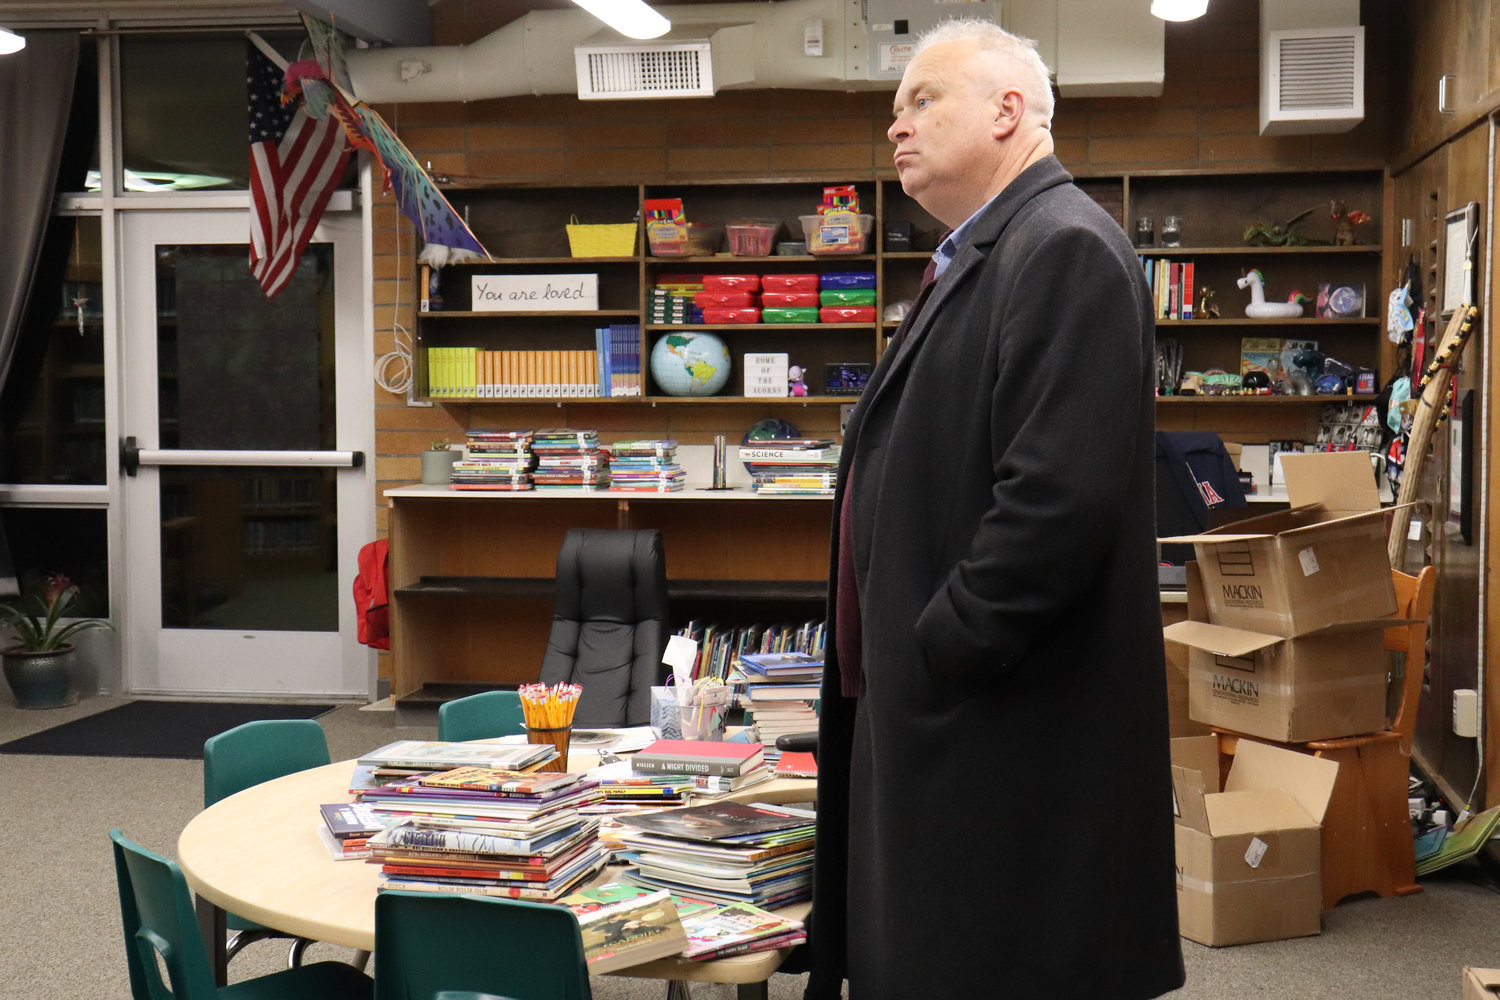 State representative Jim Walsh tours the Oakville Elementary School library during an open house on Wednesday.